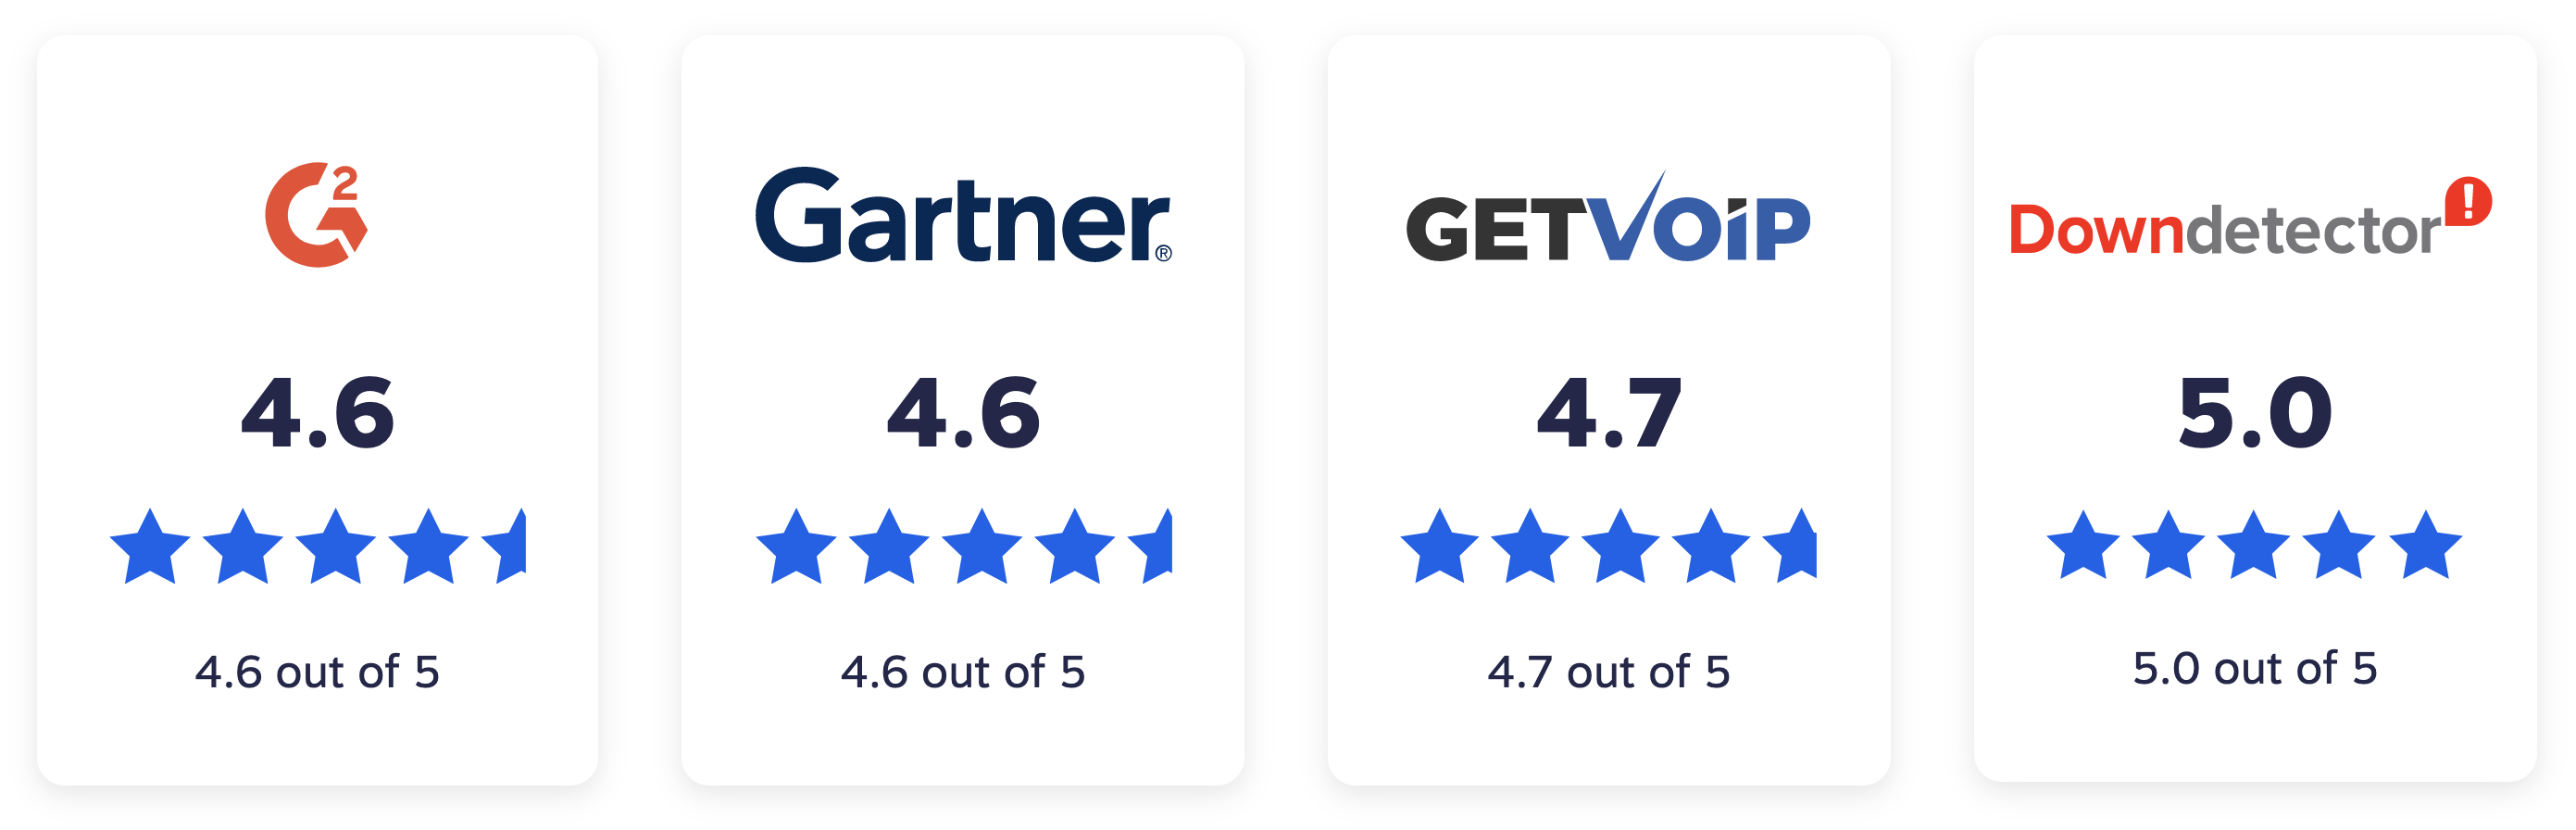 Nextiva ratings and reviews across G2, Gartner, and GetVoIP.